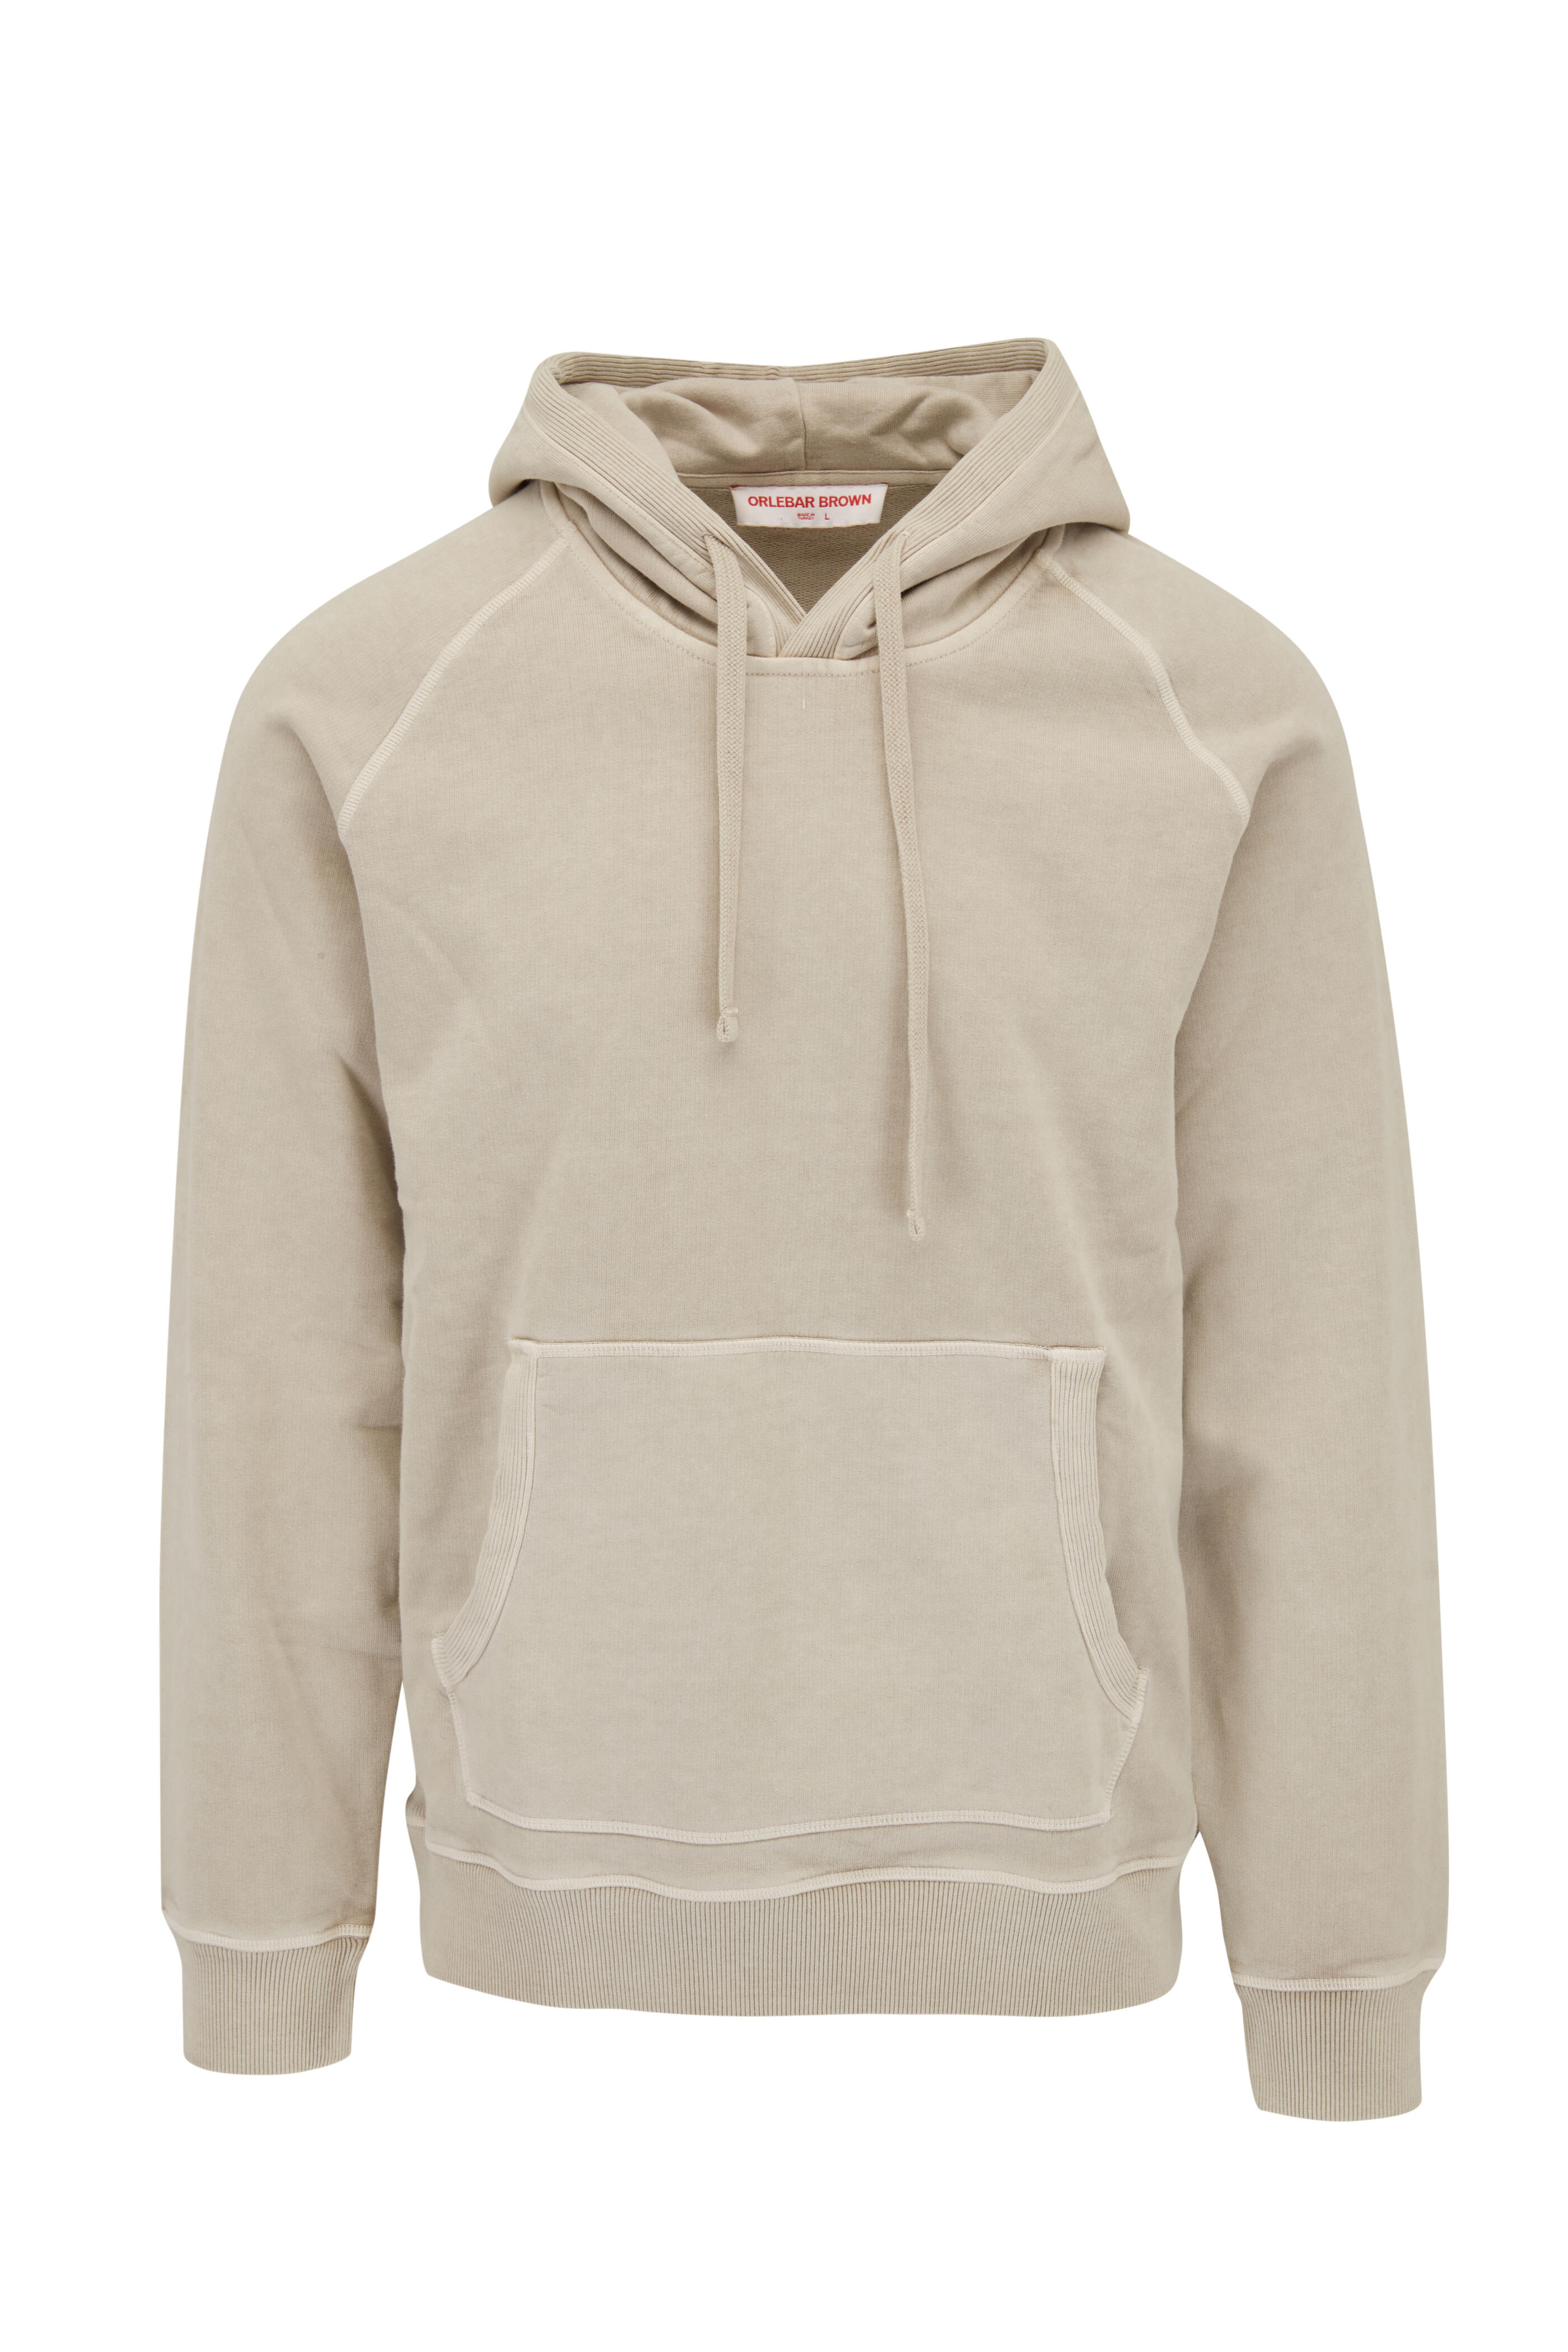 Orlebar Brown - Francis GD Parched Green Hoodie | Mitchell Stores